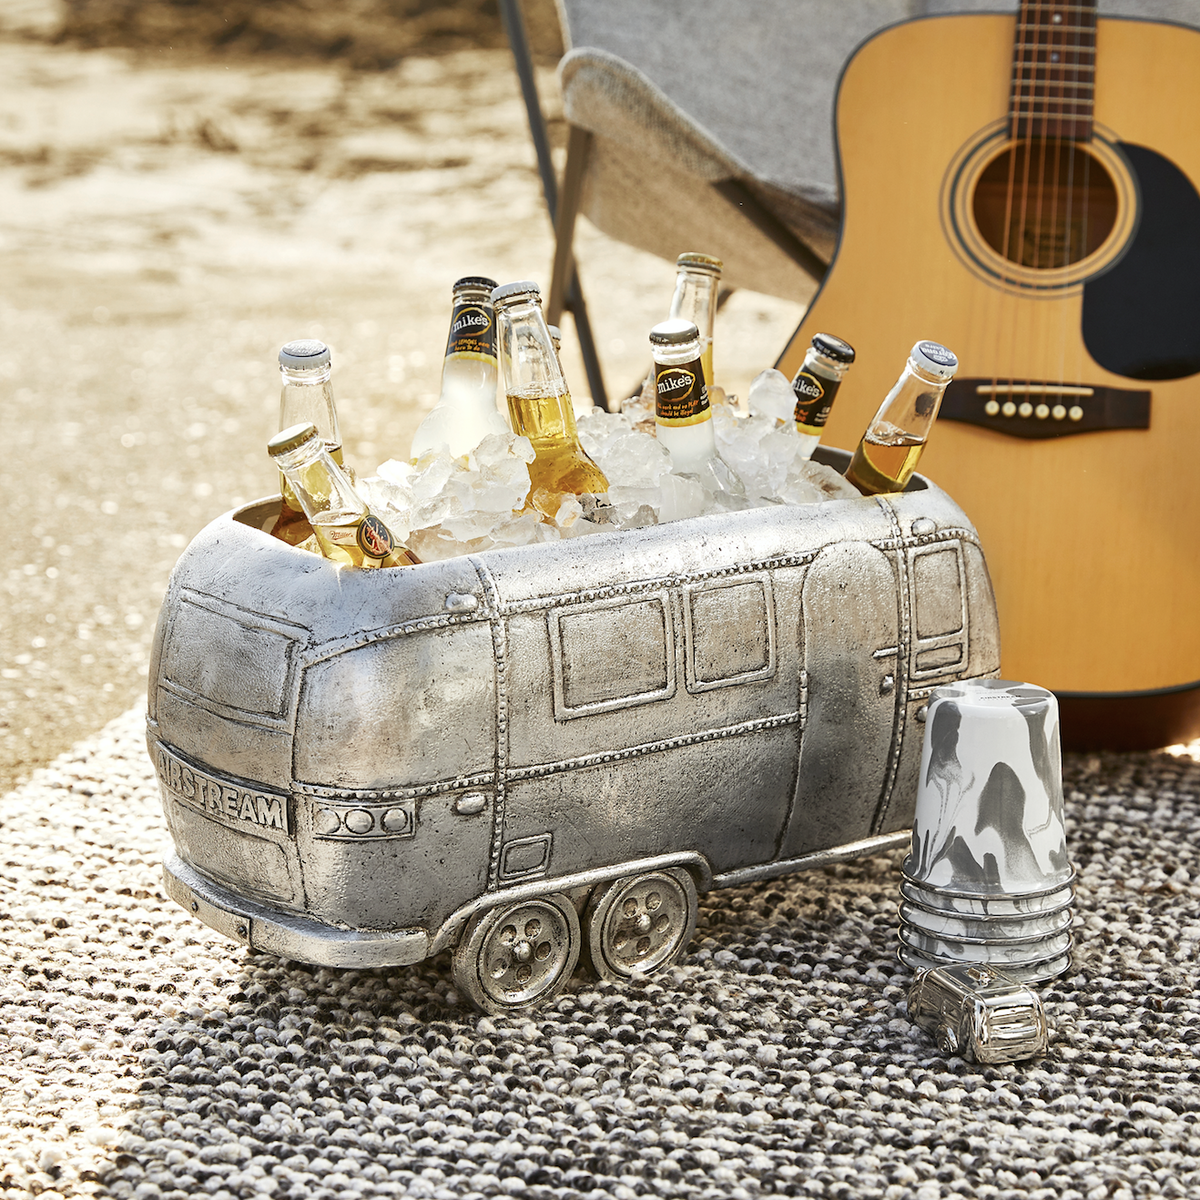 https://hips.hearstapps.com/hmg-prod/images/airstream-x-pottery-barn-cooler-1589562346.png?crop=0.6361003861003861xw:1xh;center,top&resize=1200:*